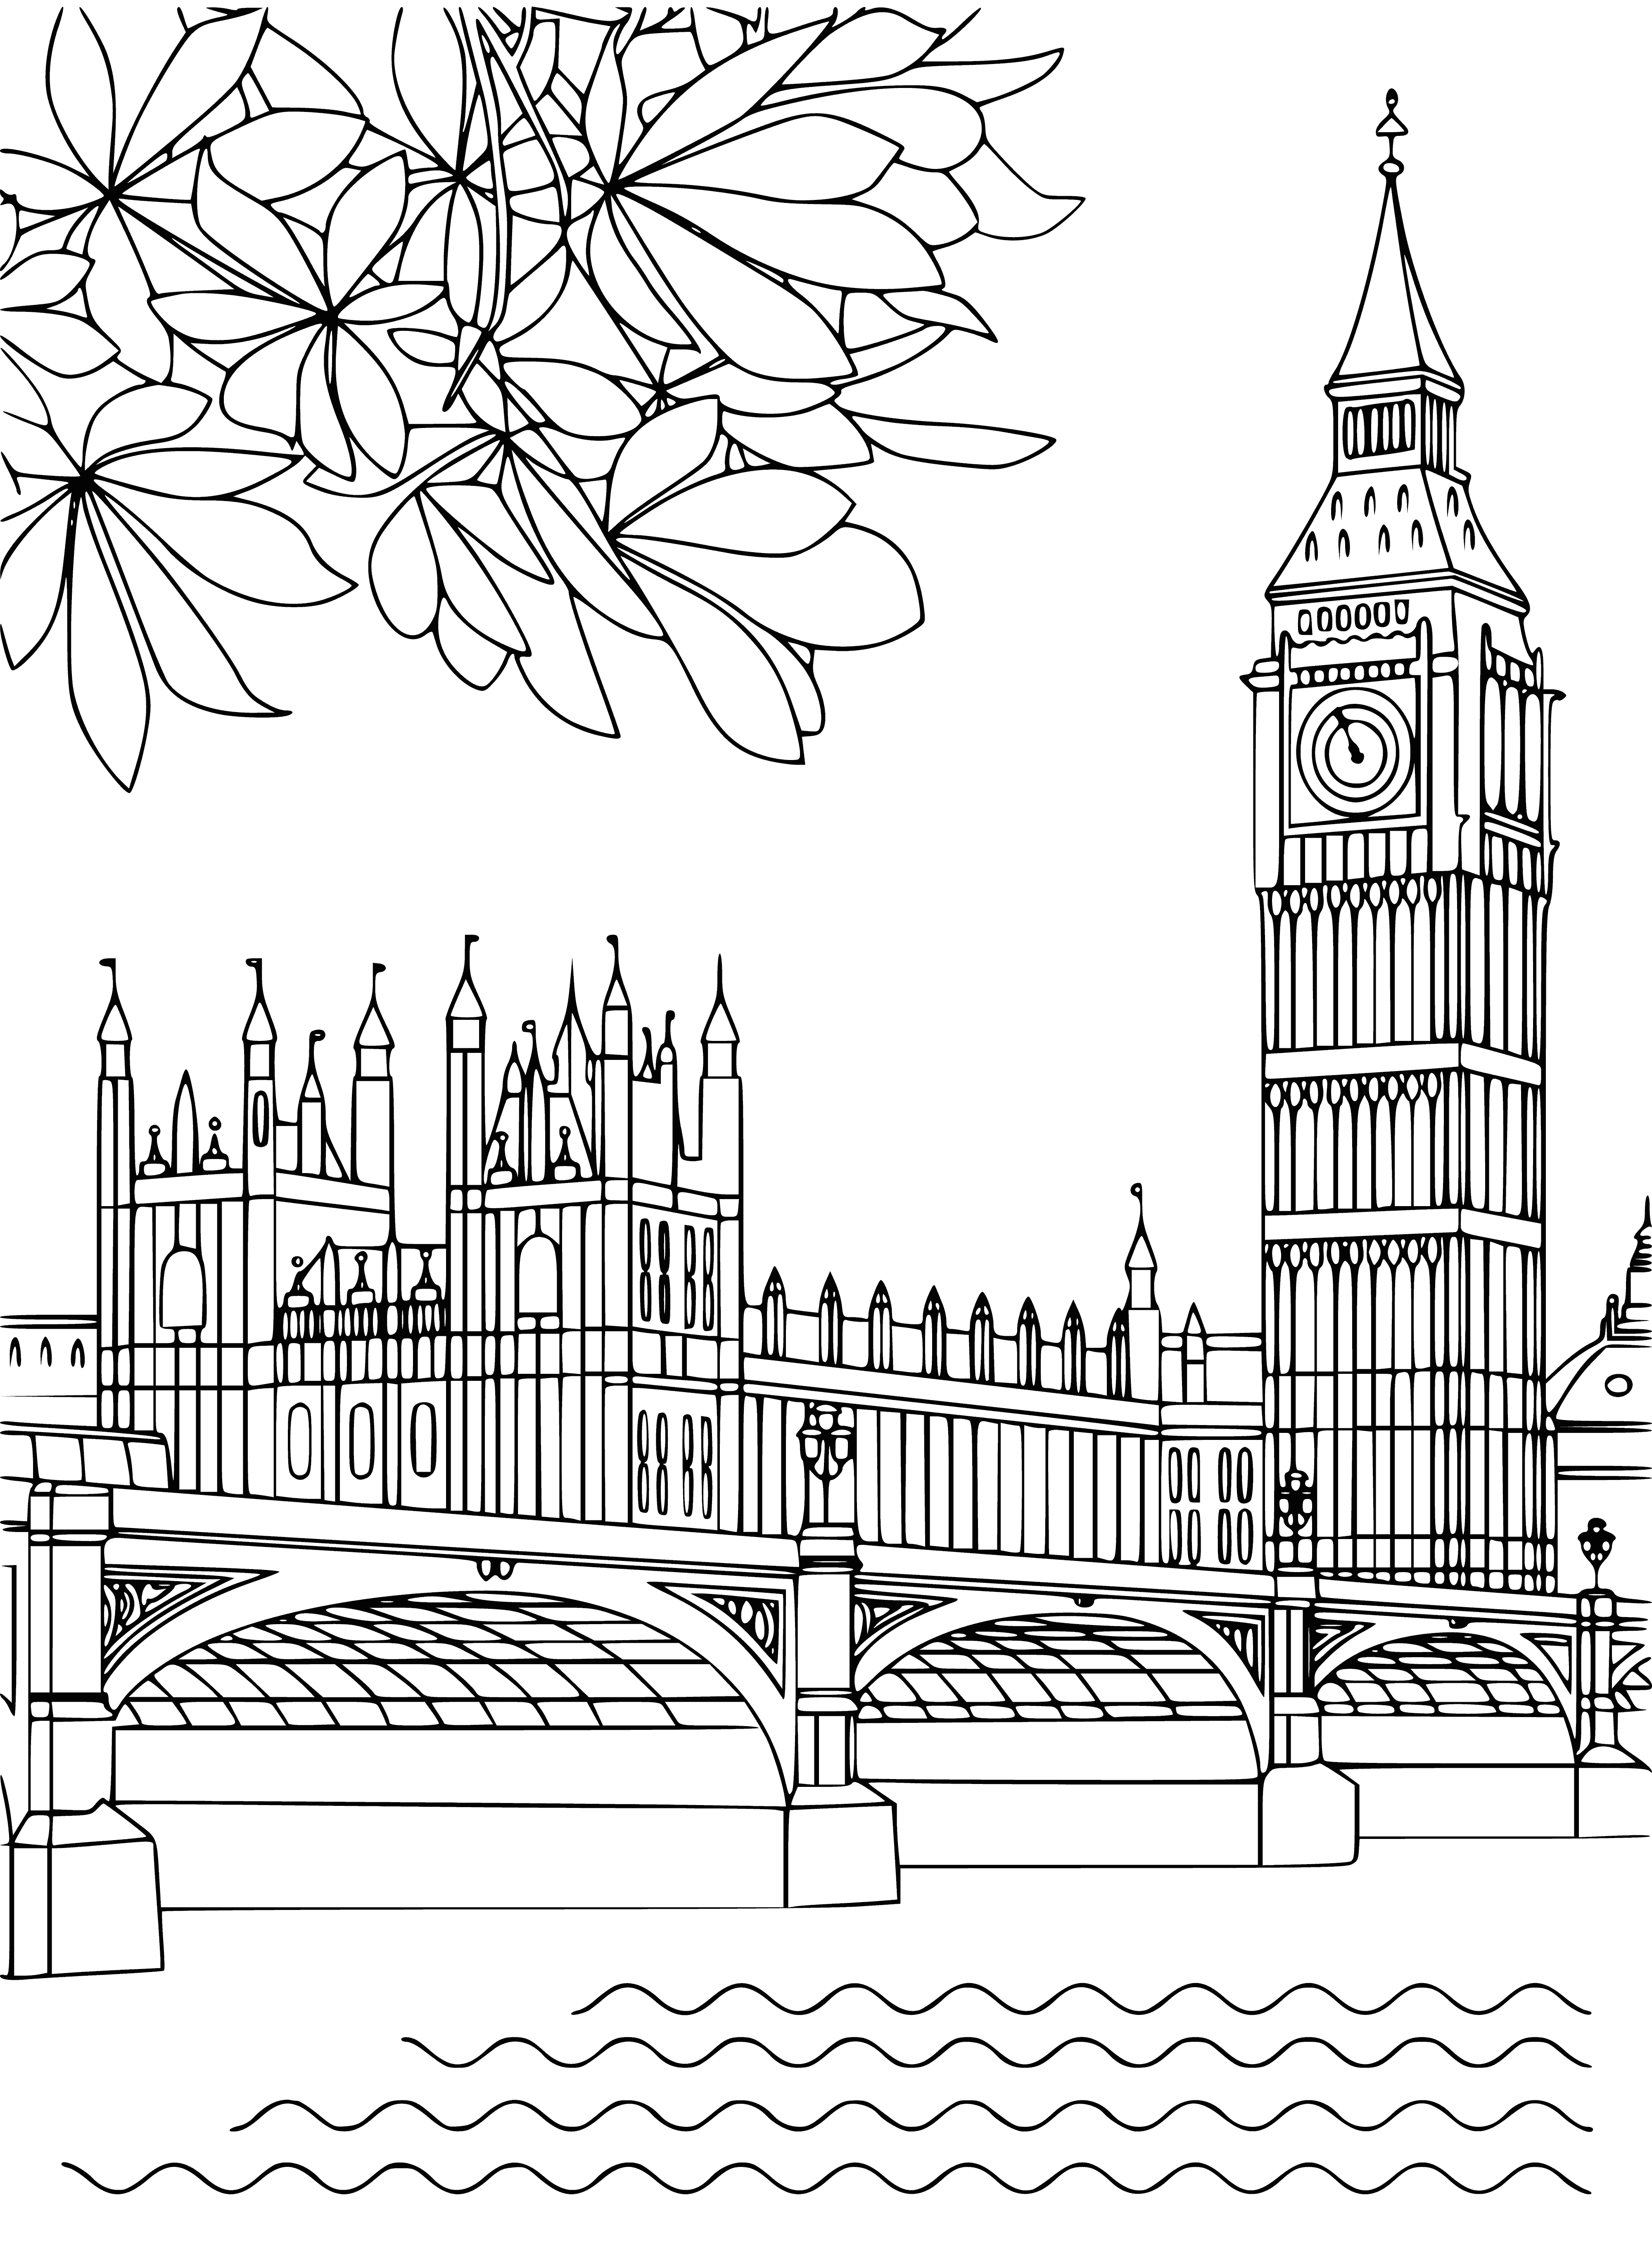 Big Ben and Palace of Westminster in London. England coloring page